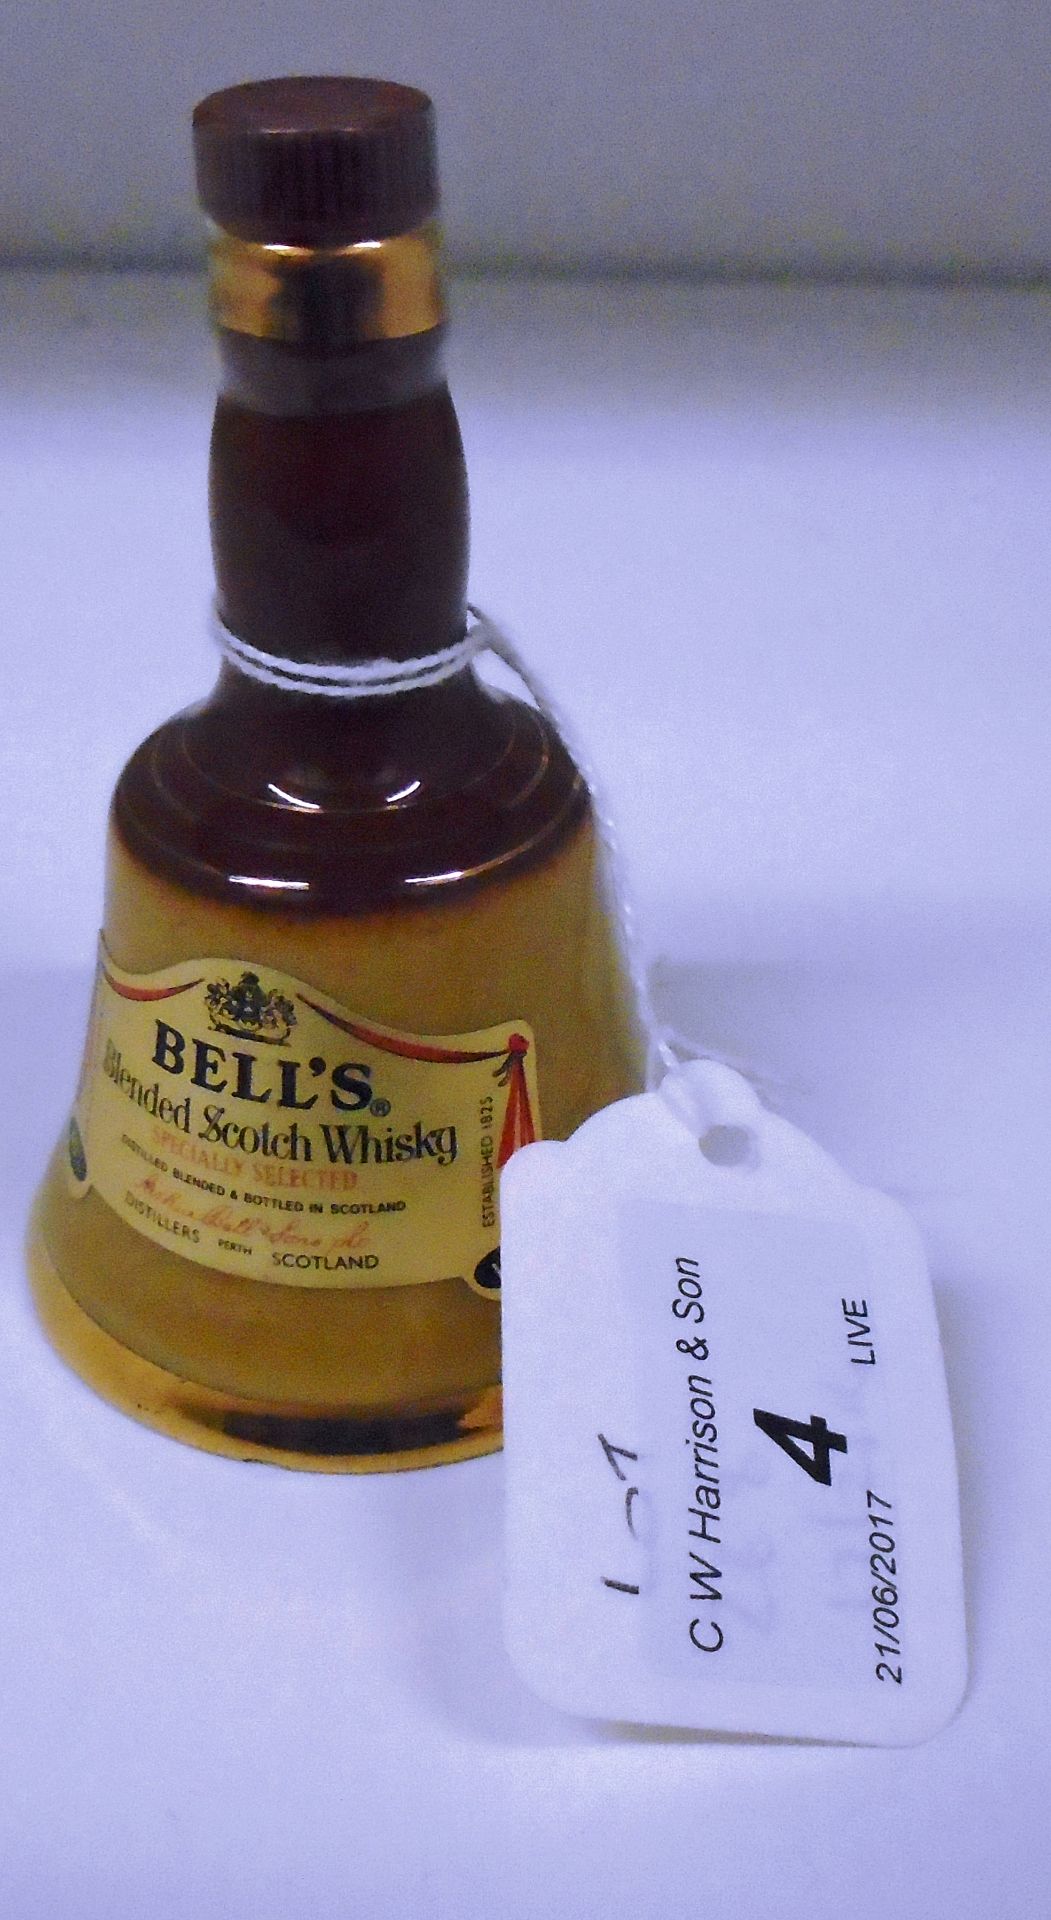 A miniature decanter of Bell's blended Scotch whisky